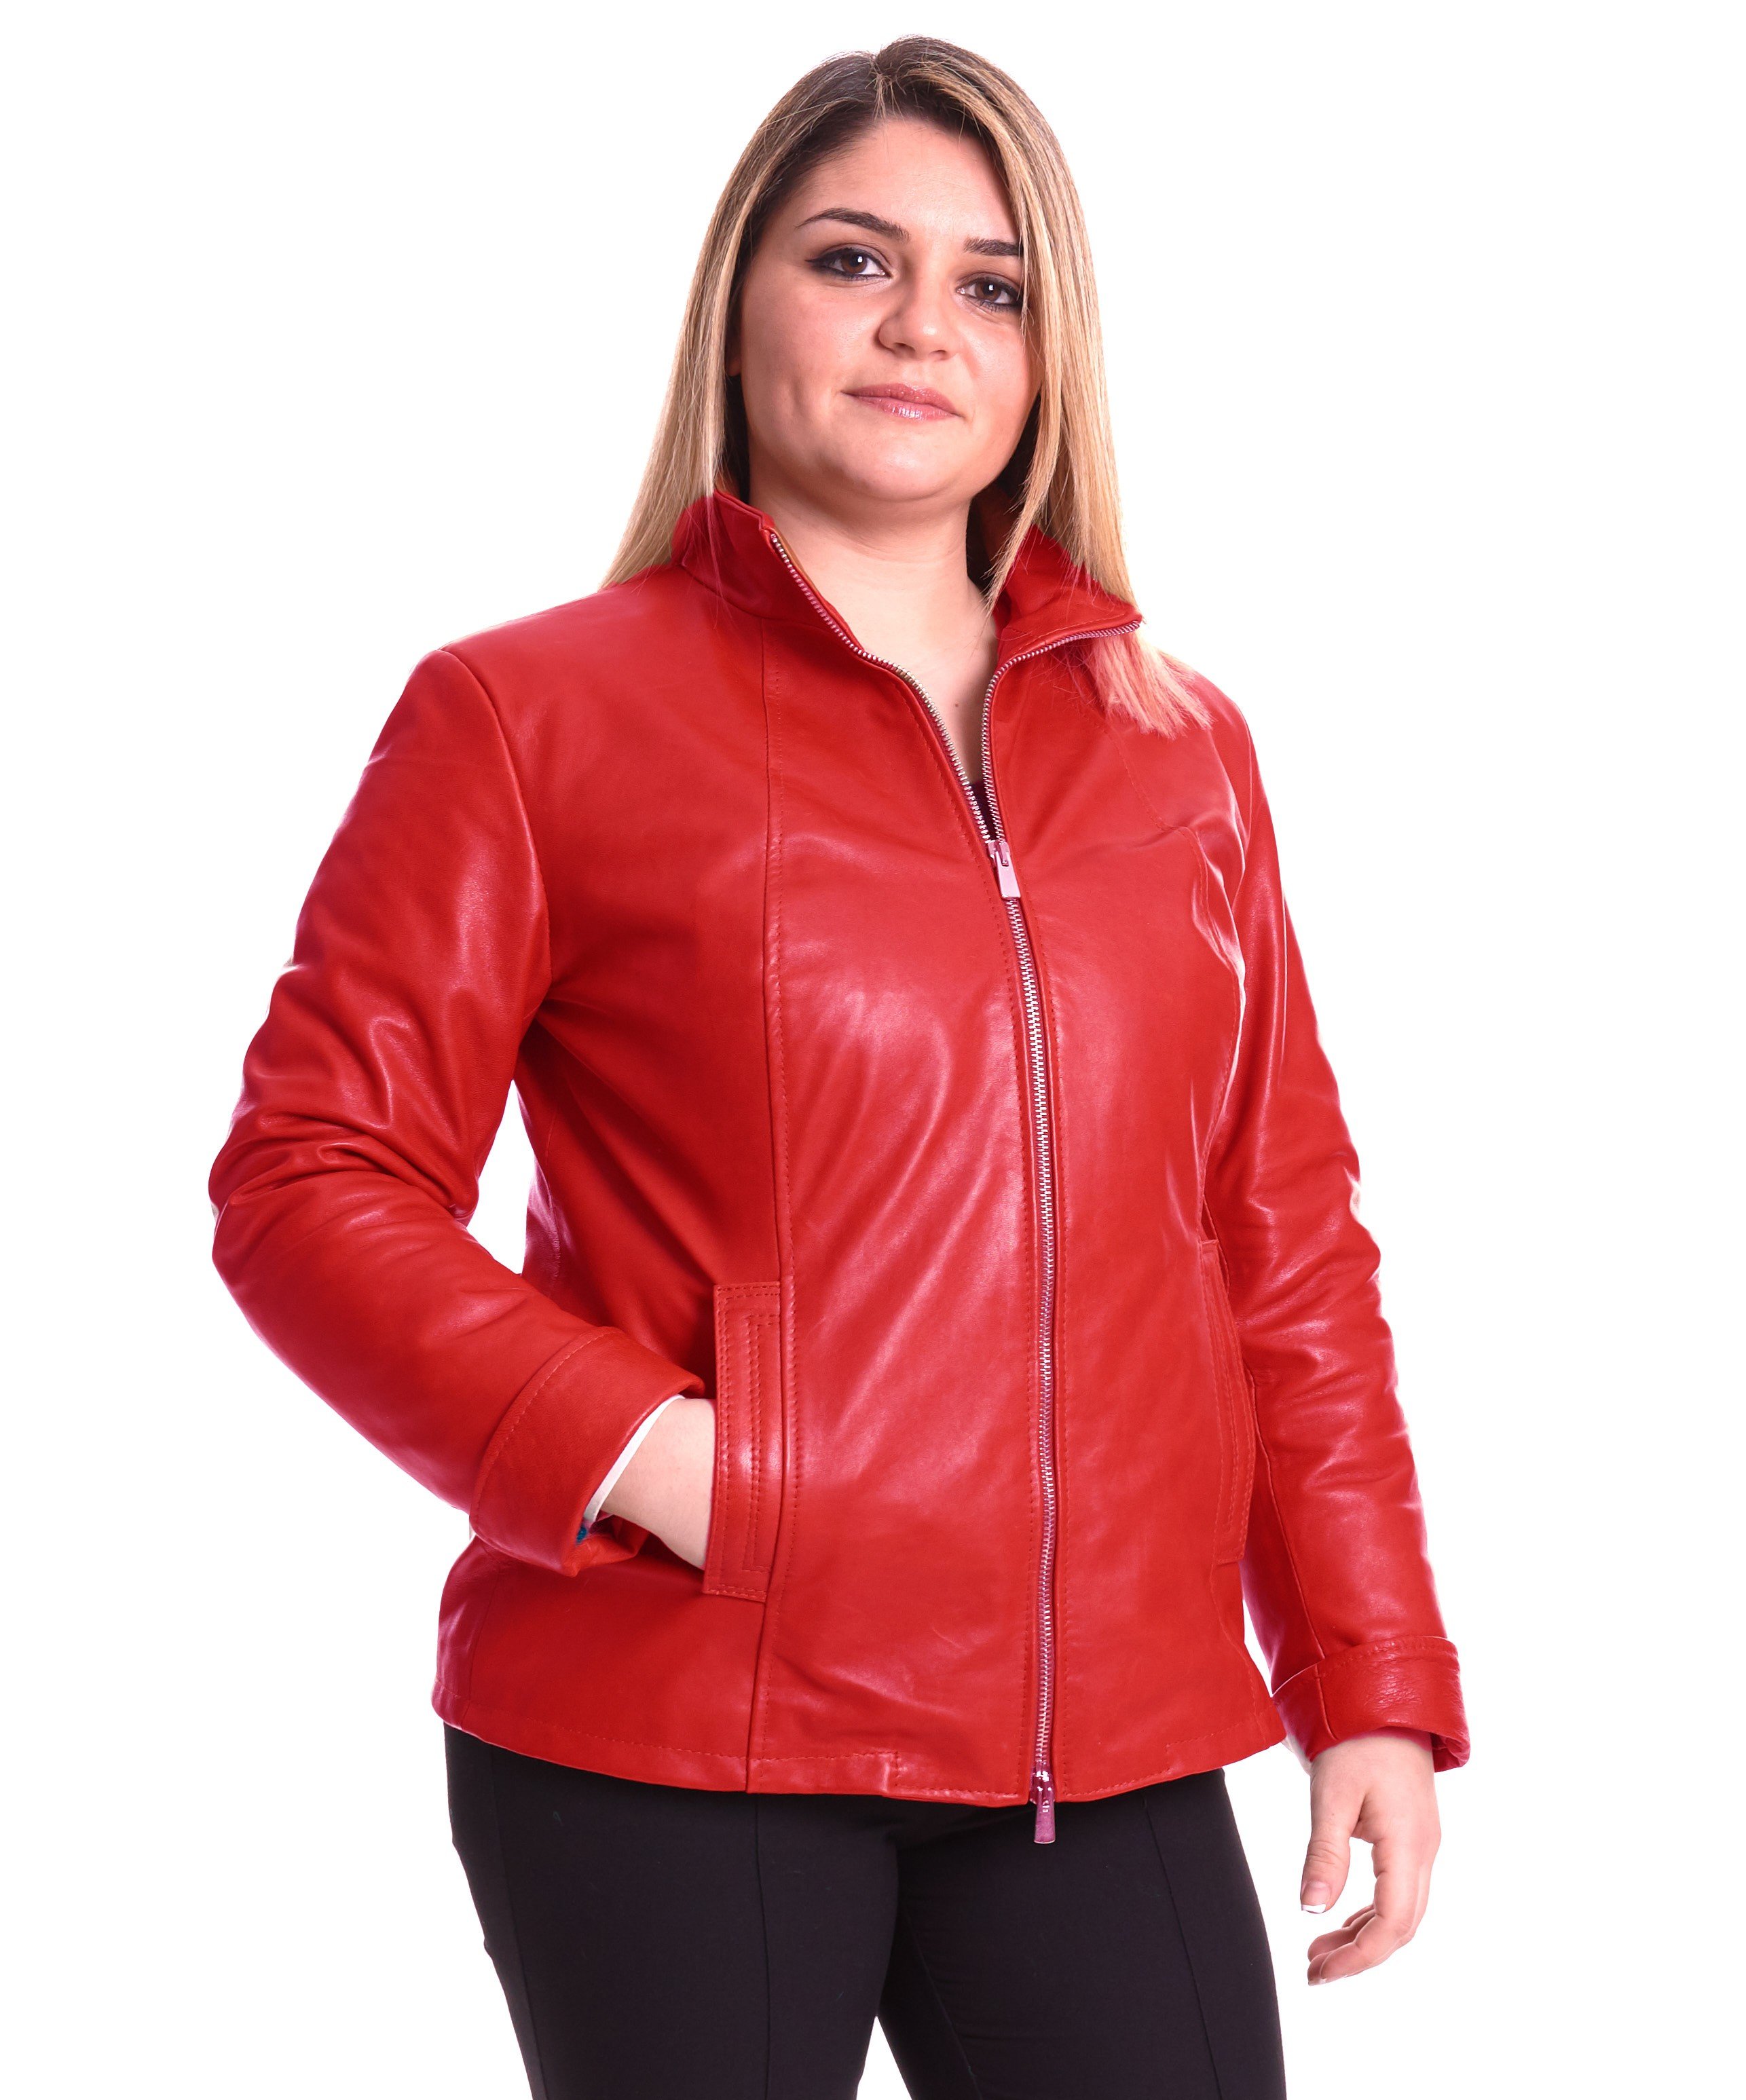 Red nappa lamb leather jacket high collar comfort fit